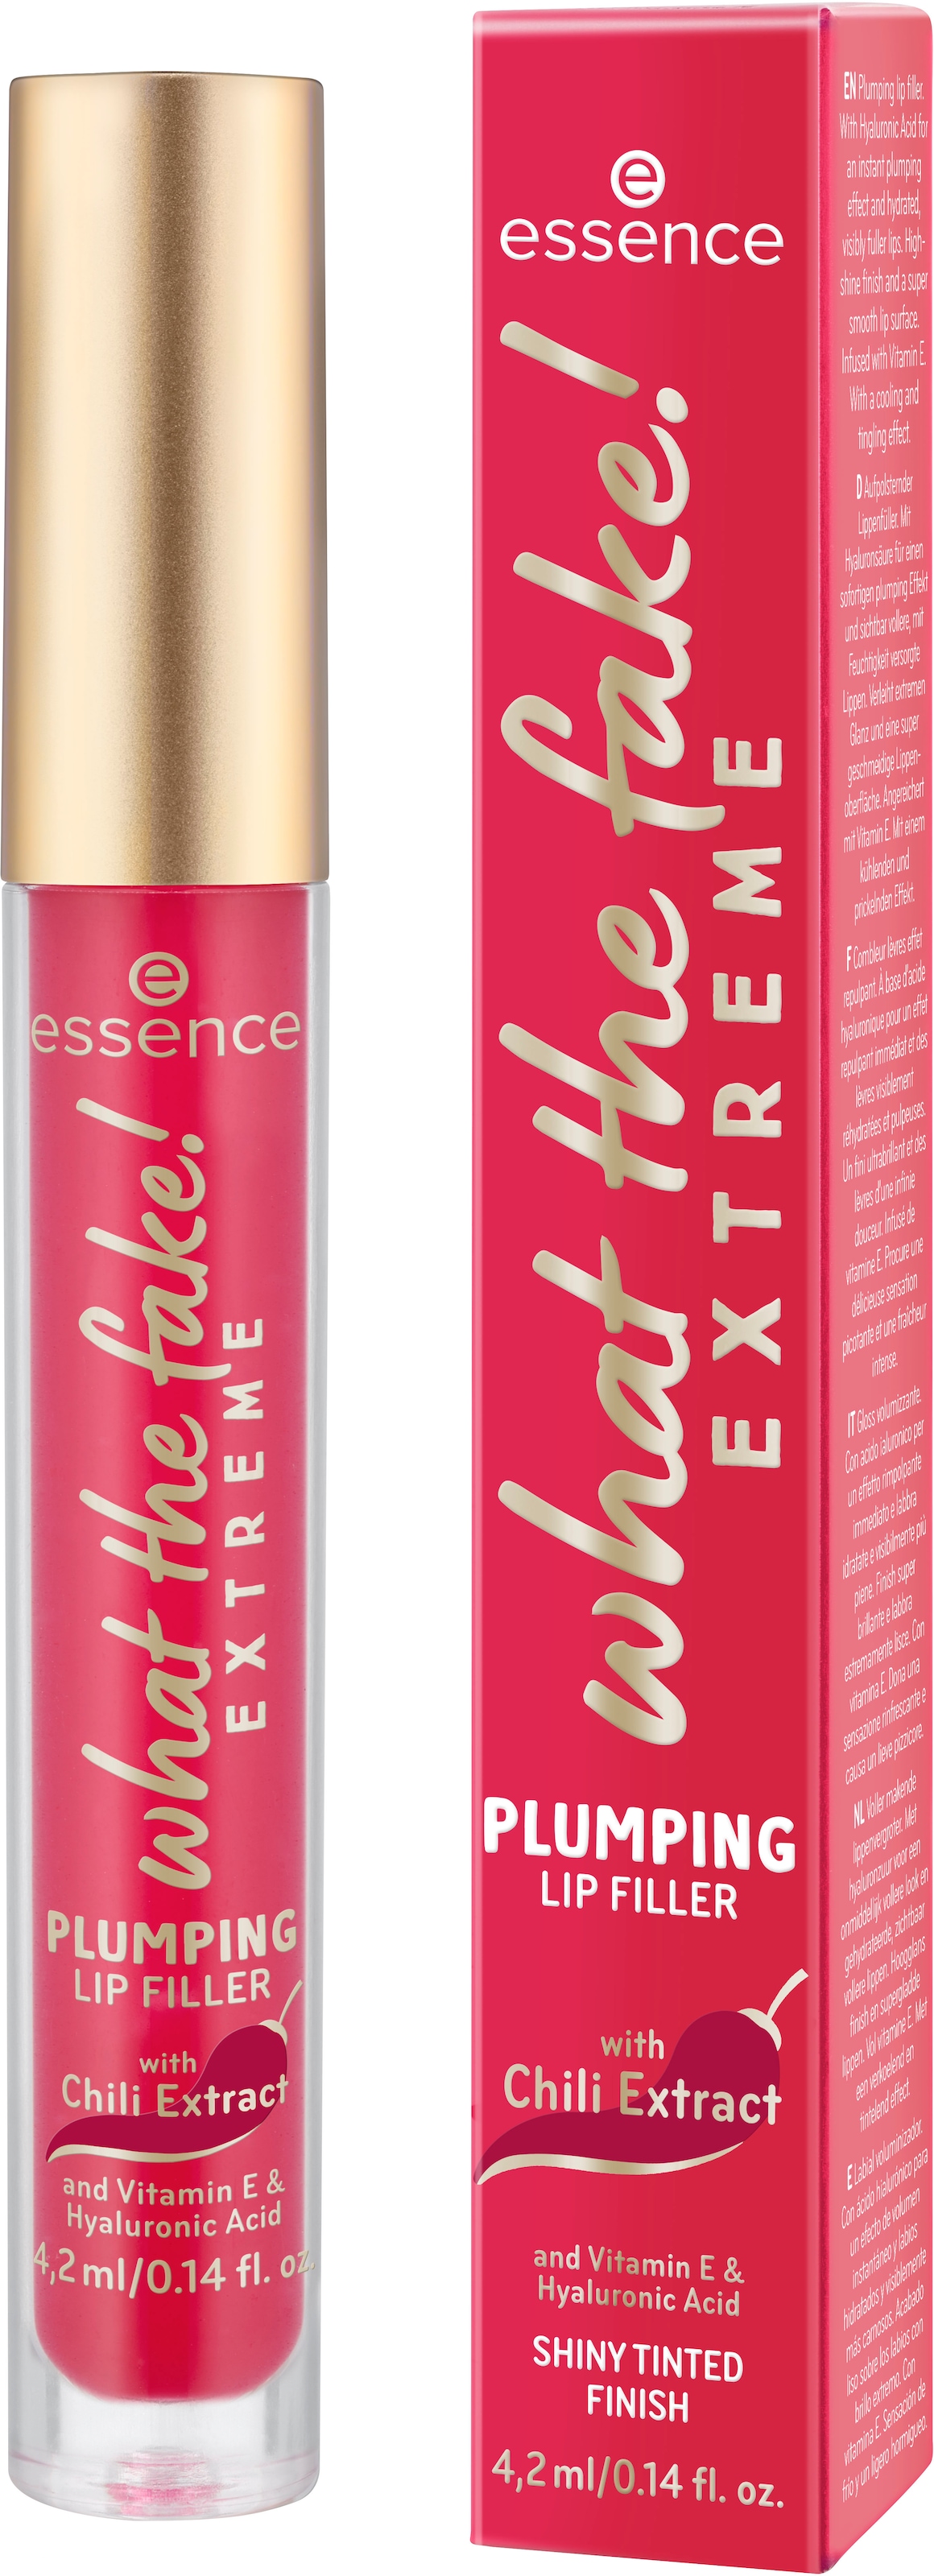 Essence Lip-Booster bei tlg.) LIP EXTREME »what PLUMPING (Set, the fake! 3 FILLER«, ♕